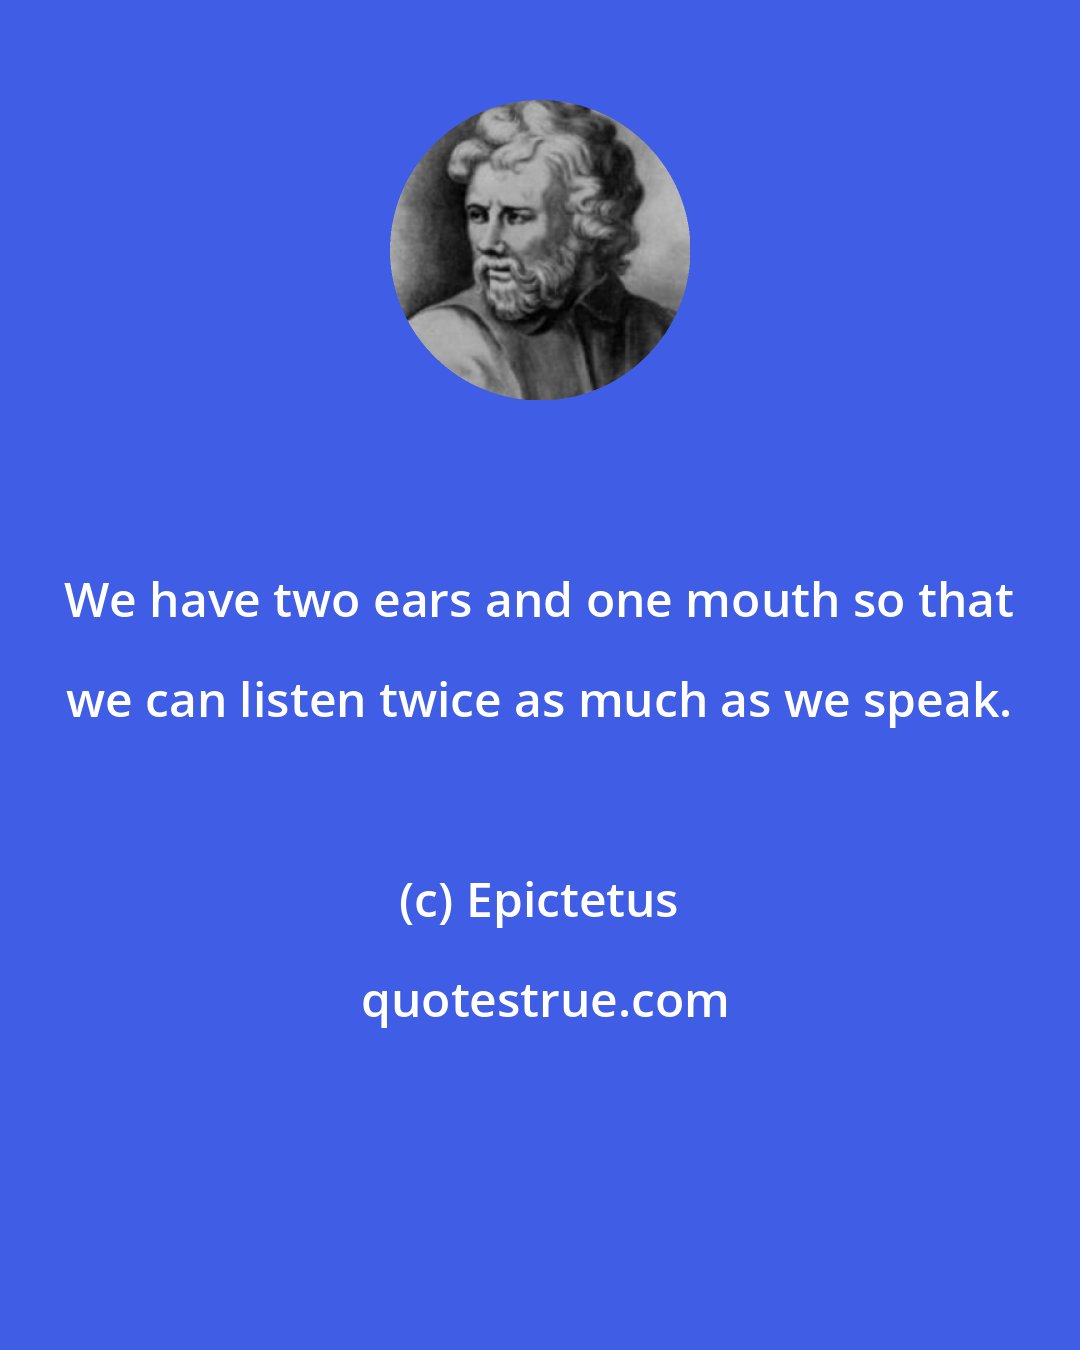 Epictetus: We have two ears and one mouth so that we can listen twice as much as we speak.